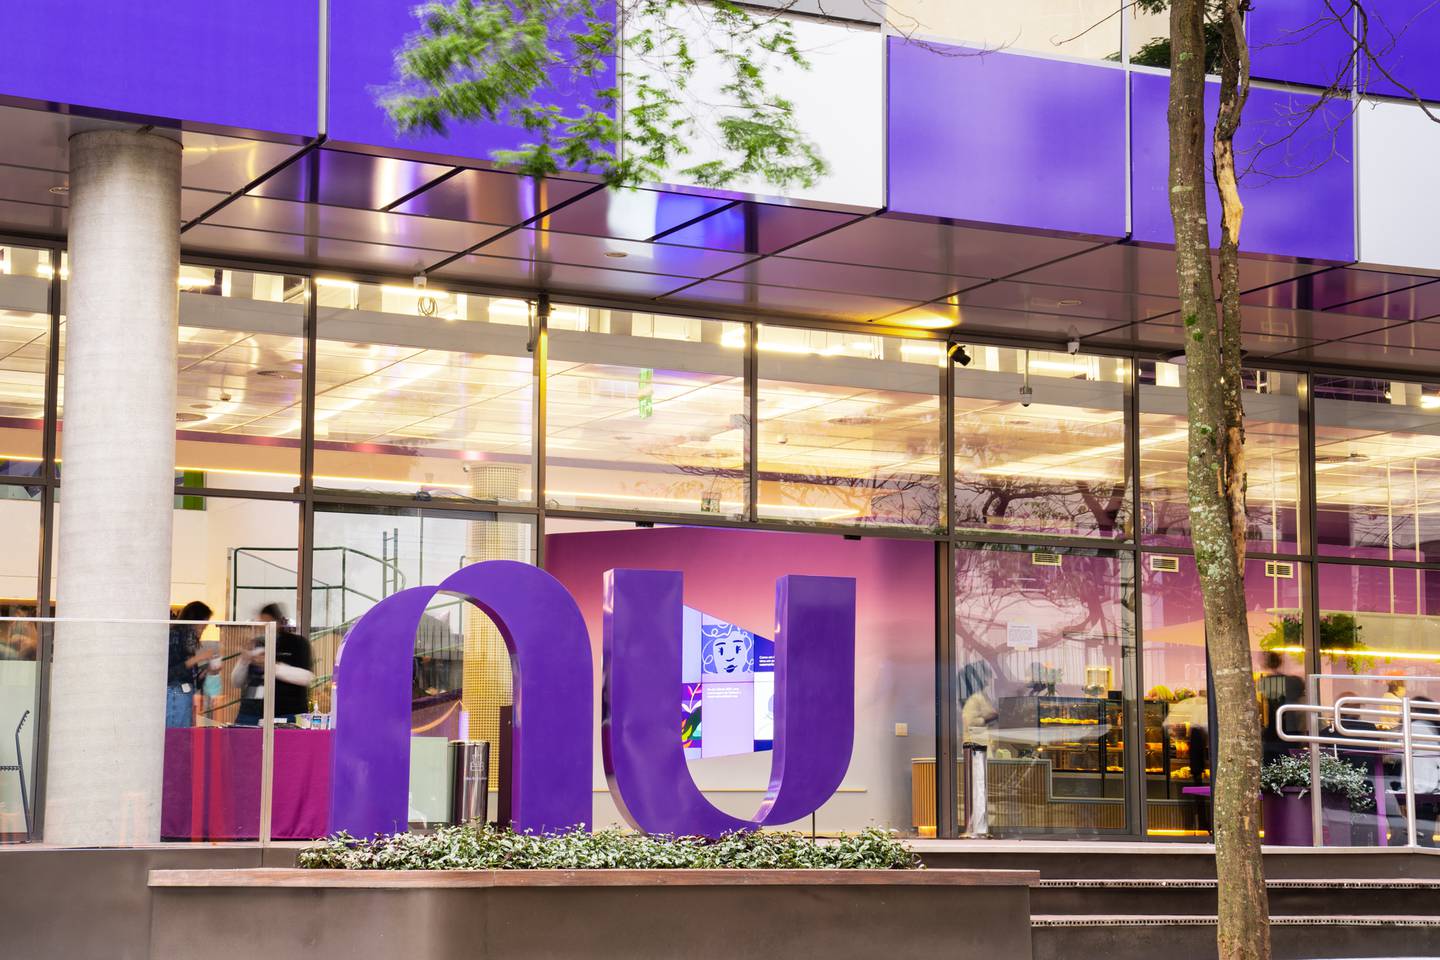 Nubank says that if the central bank's resolution regarding a cap on transfer fees had been in force since July 2021, the company’s revenue would have been negatively affected by 2.9%.